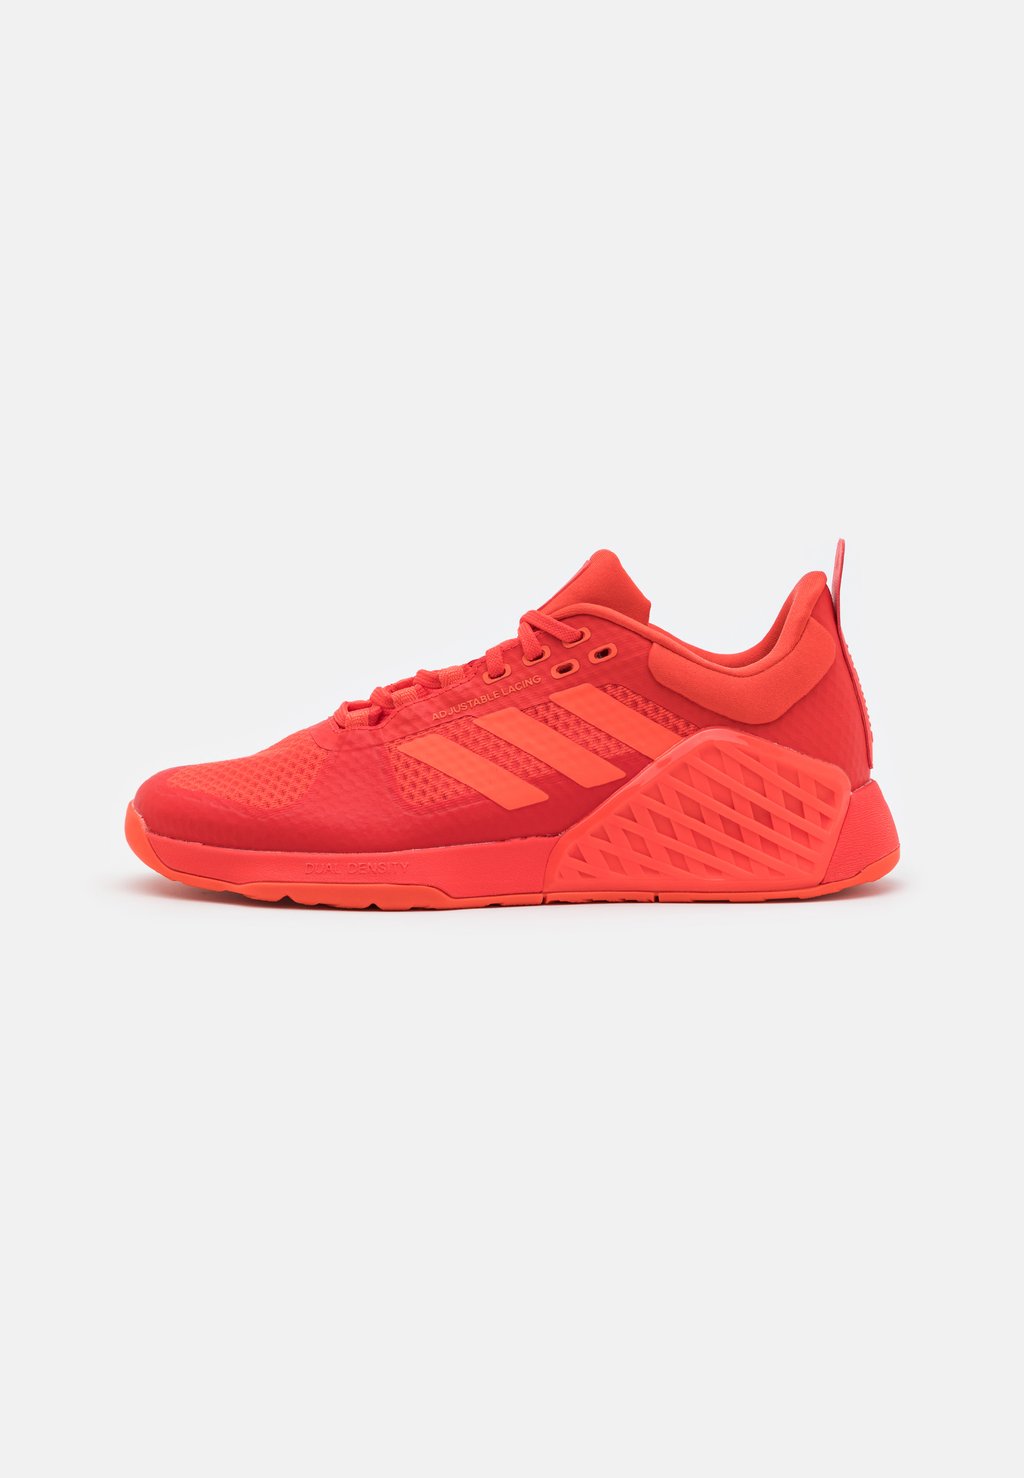 Кроссовки DROPSET 2 TRAINER adidas Performance, цвет bright red/solar red/shadow red лыжные брюки terrext xperior 2l non insulated adidas цвет shadow red